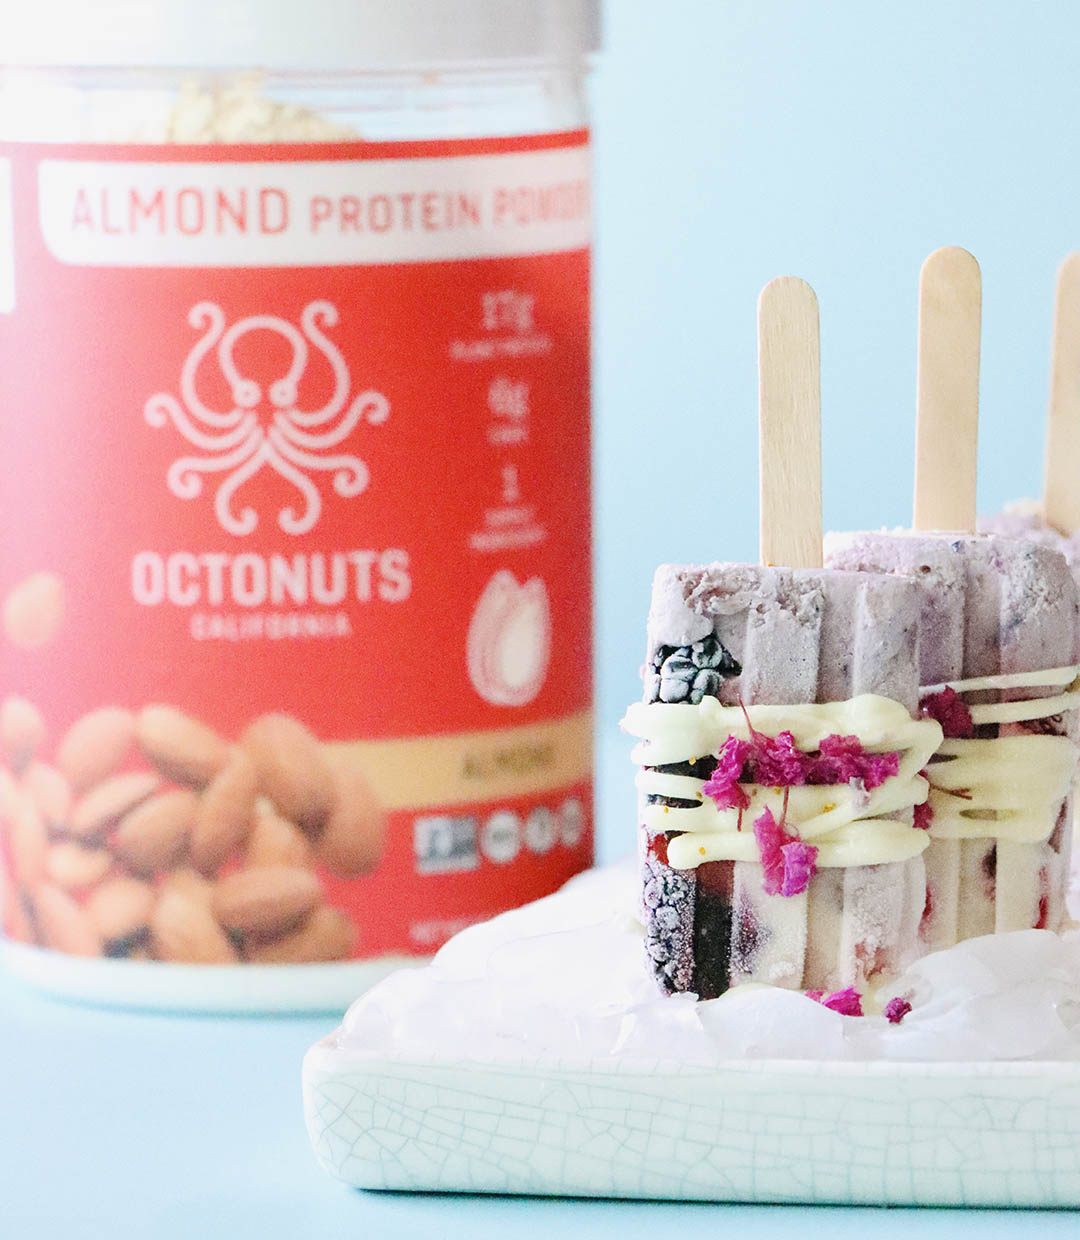 Protein Popsicles with Octonuts Almond Protein Powder